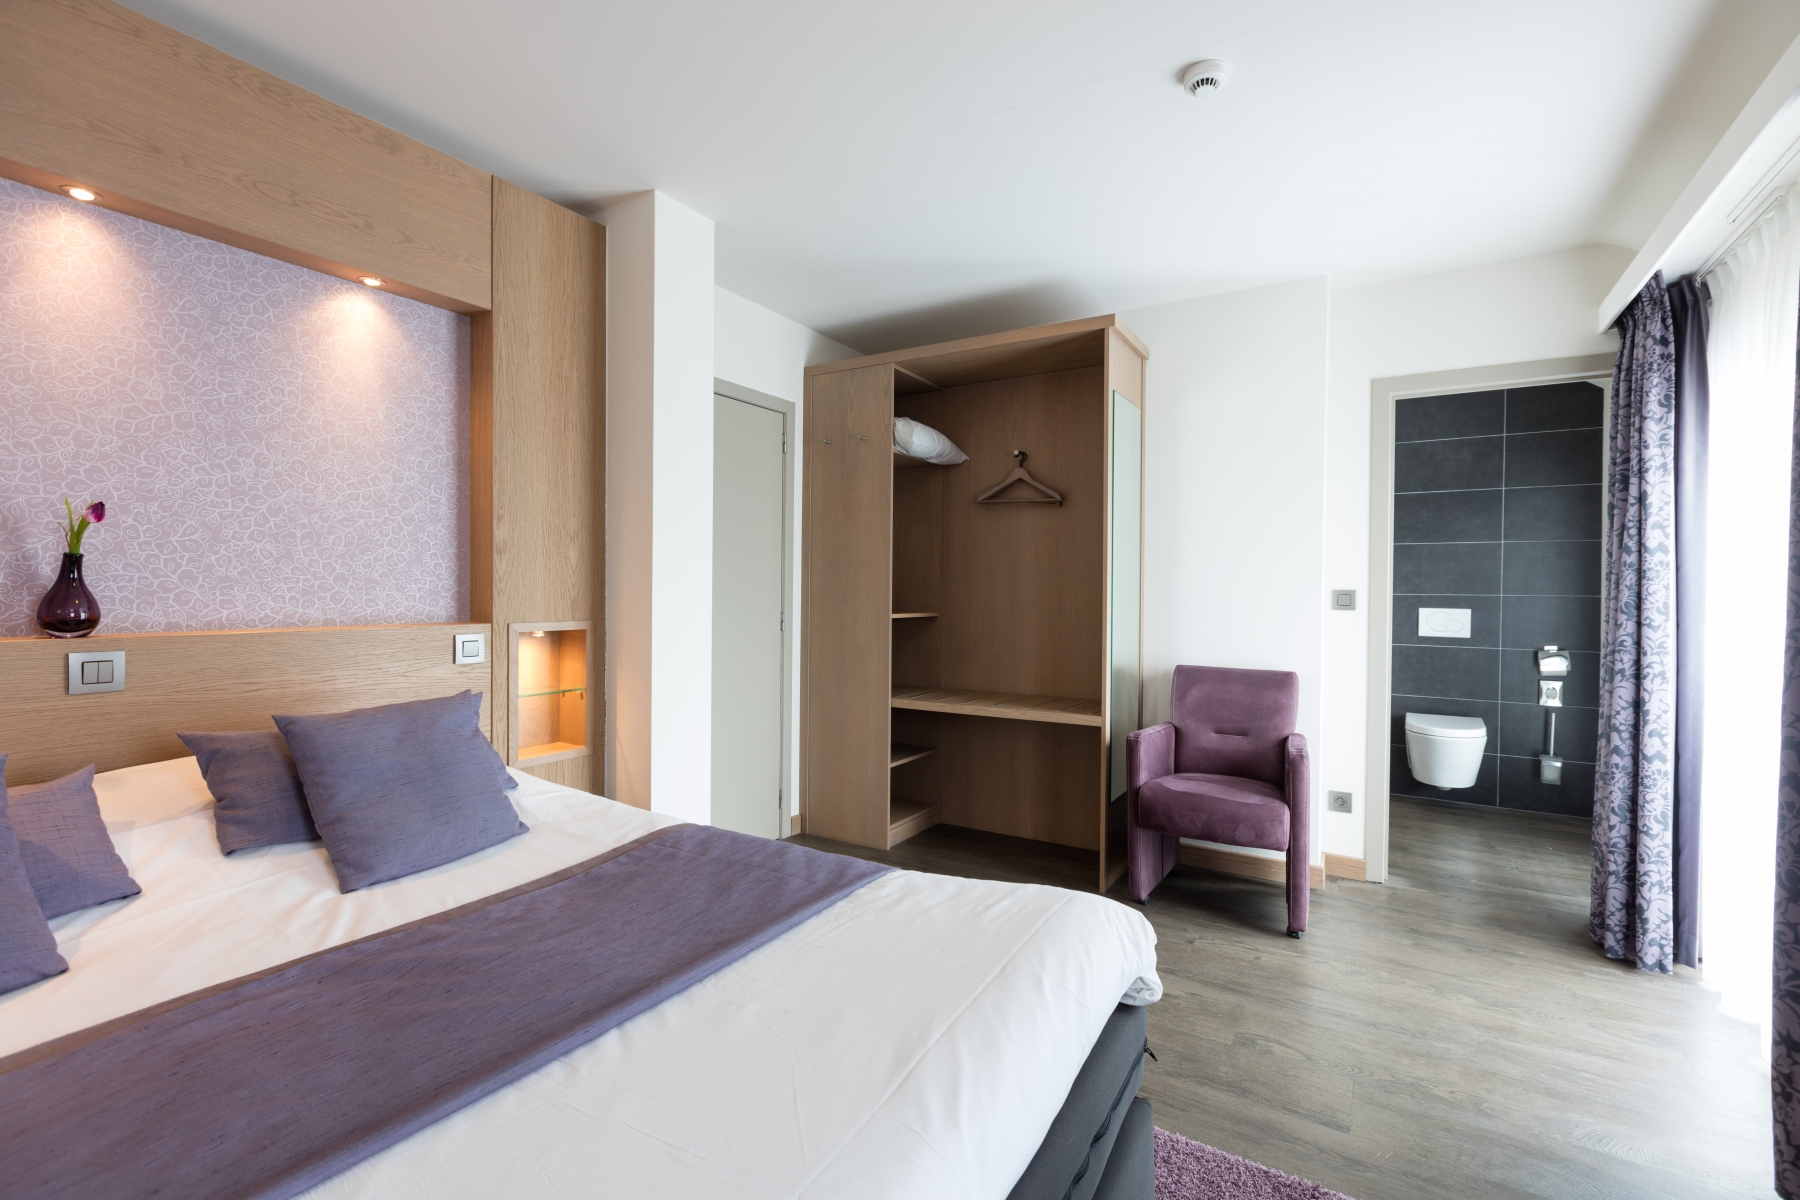 Hotel - La Grande Cure <br/>83.33 ew <br/> <a href='http://vakantieoplossing.nl/outpage/?id=1a8d4632f839393bd2b7cfe1a6ac9a53' target='_blank'>View Details</a>